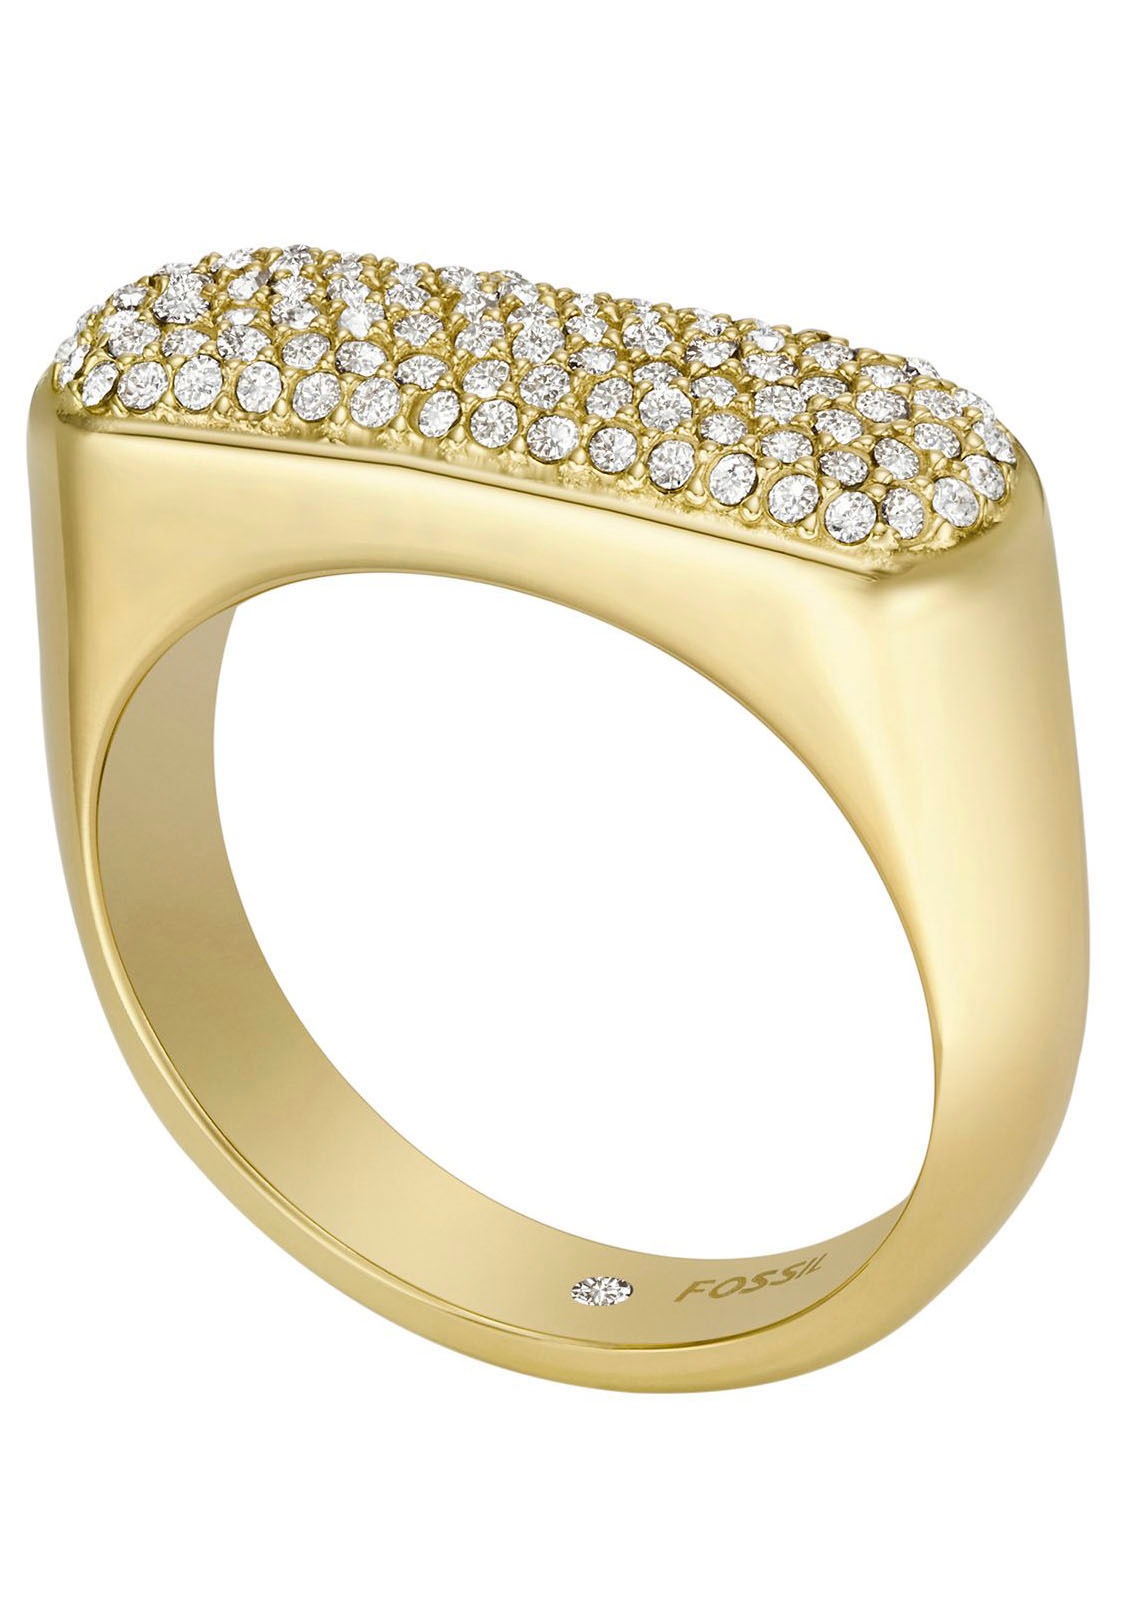 Fossil Fingerring »HERITAGE D-LINK GLITZ, JF04585710, JF04586710«, wahlweise mit oder ohne Zirkonia (synth.)